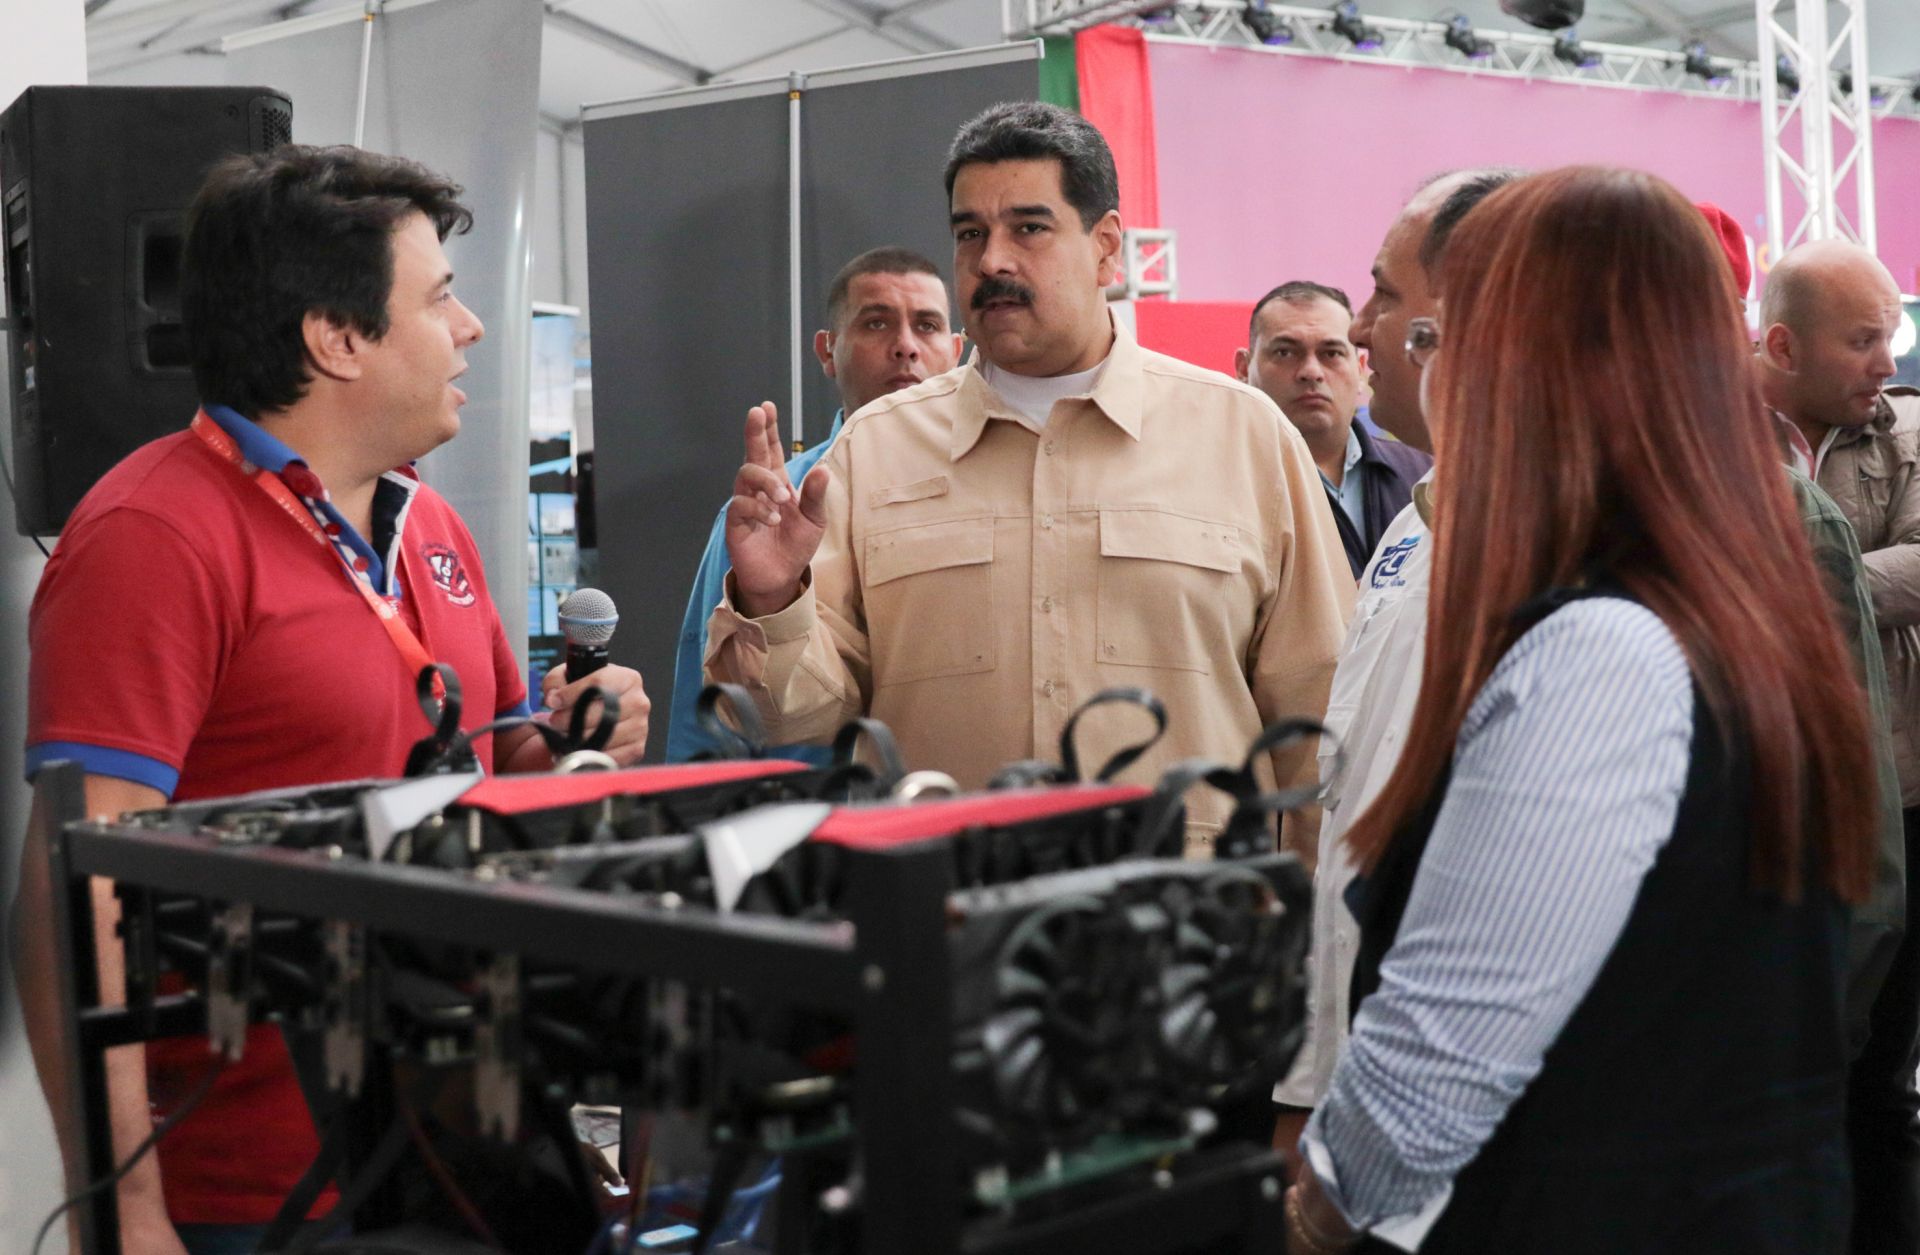 President Nicolas Maduro (C) of Venezuela attends the International Science and Technology Fair in Caracas on Dec. 3.